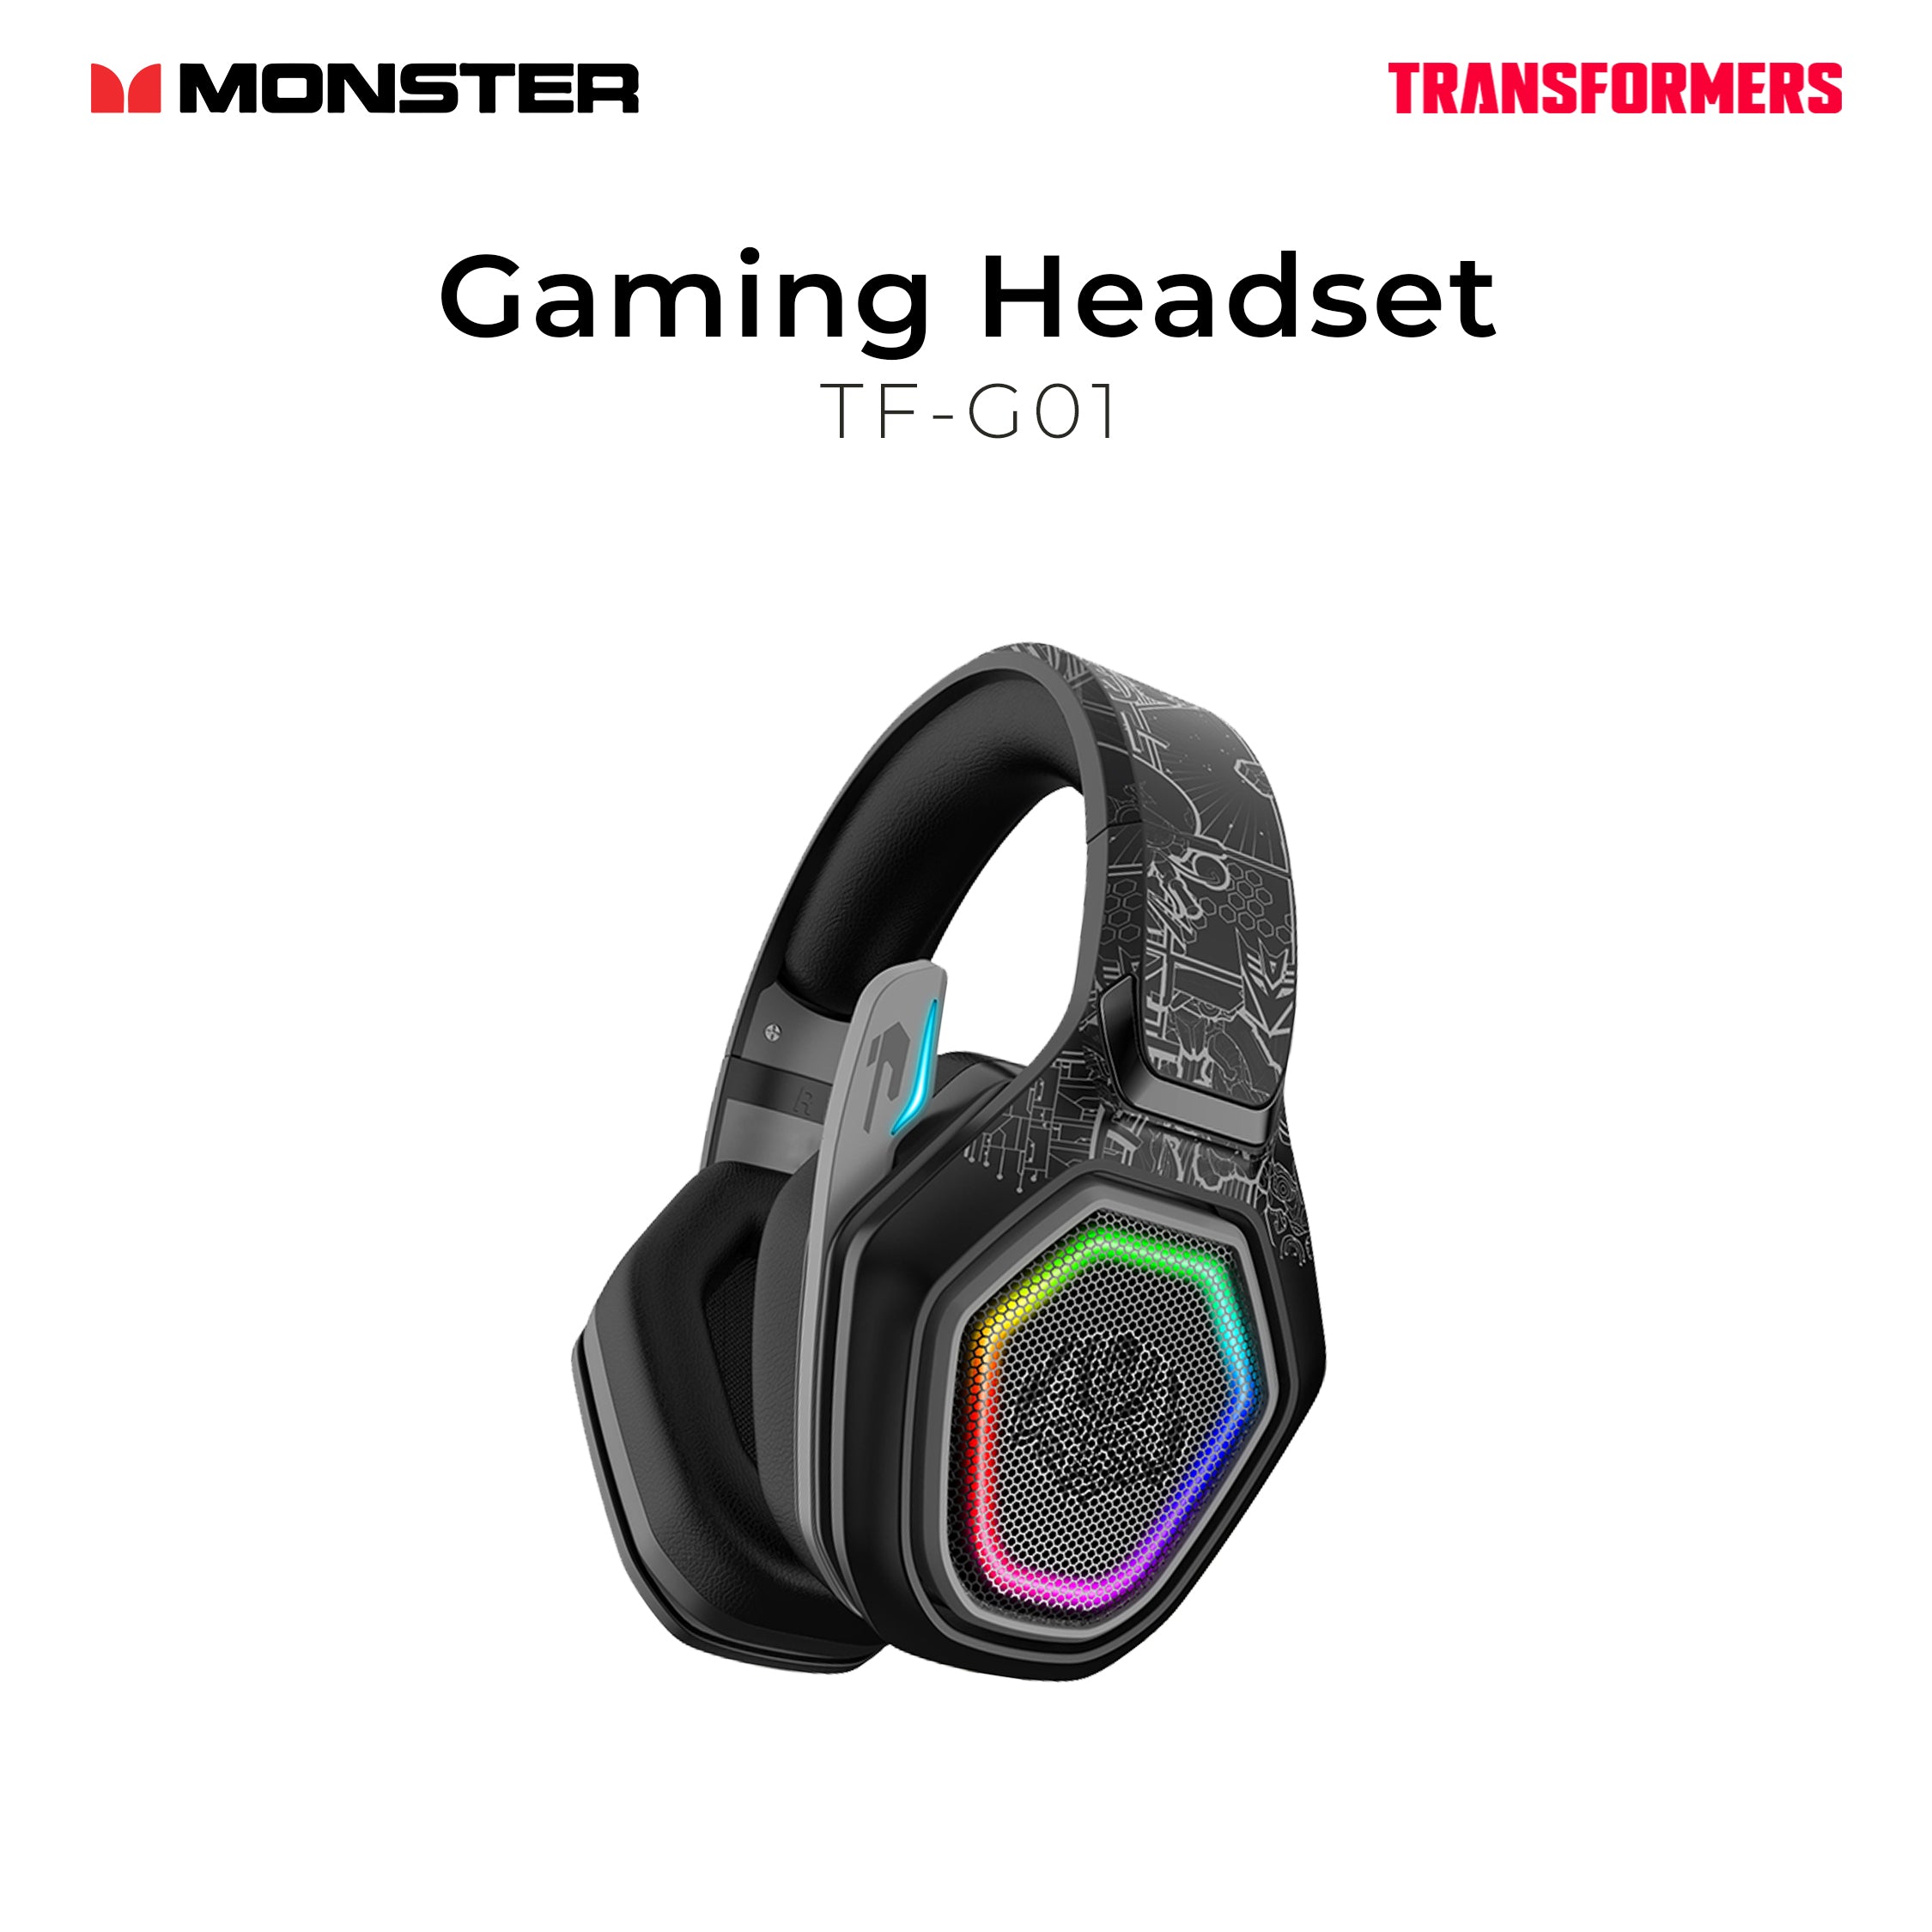 Monster Transformers Gaming Headset TF-G01